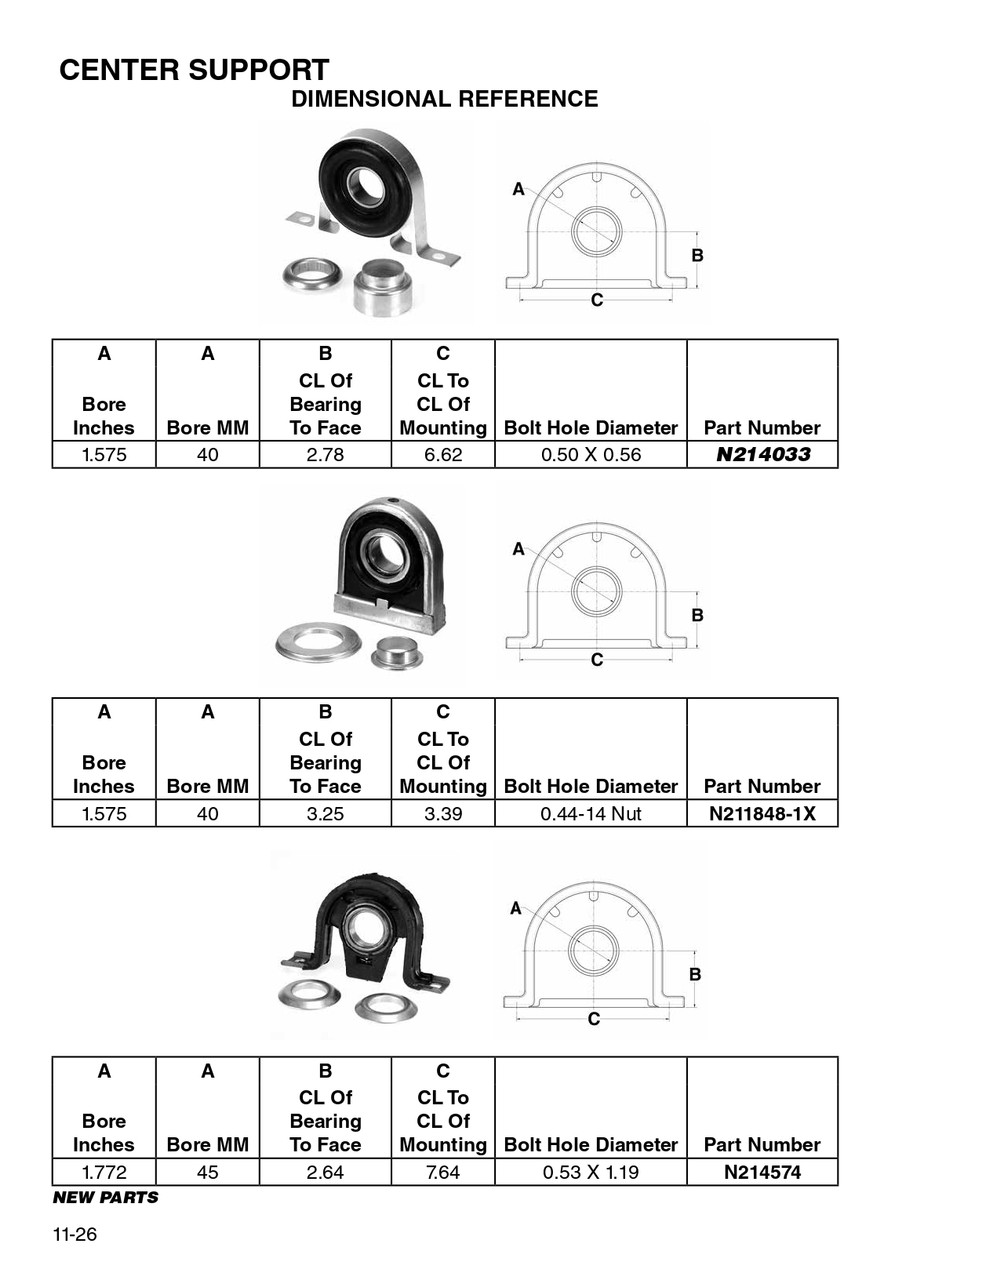 45mm Drive Line Center Support Bearing  N214574